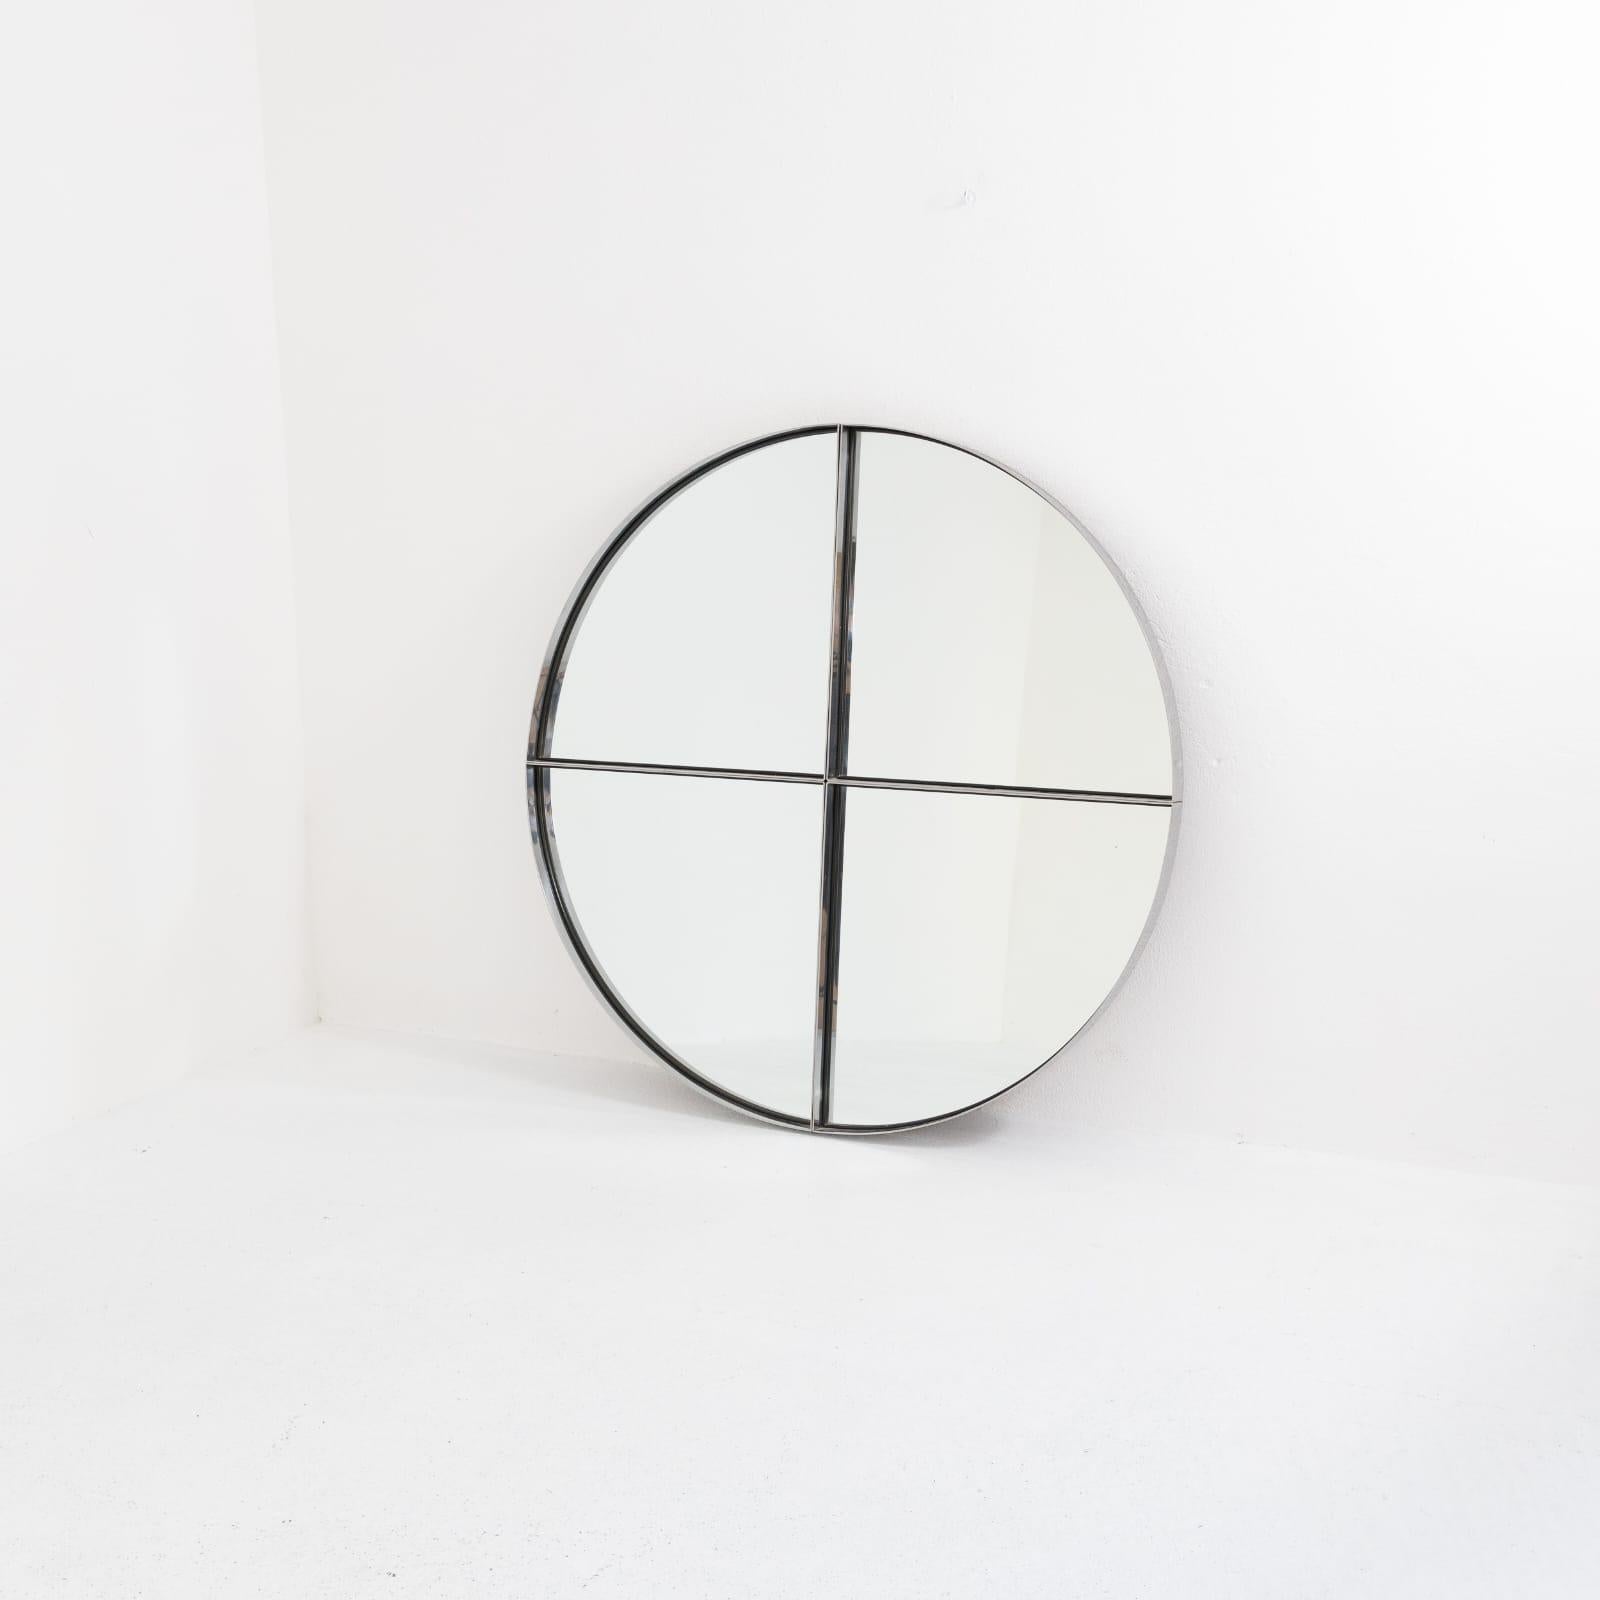 Large Steel Metal Round Mirror by Vittorio Introini for Saporiti. Italy, 1970s For Sale 6